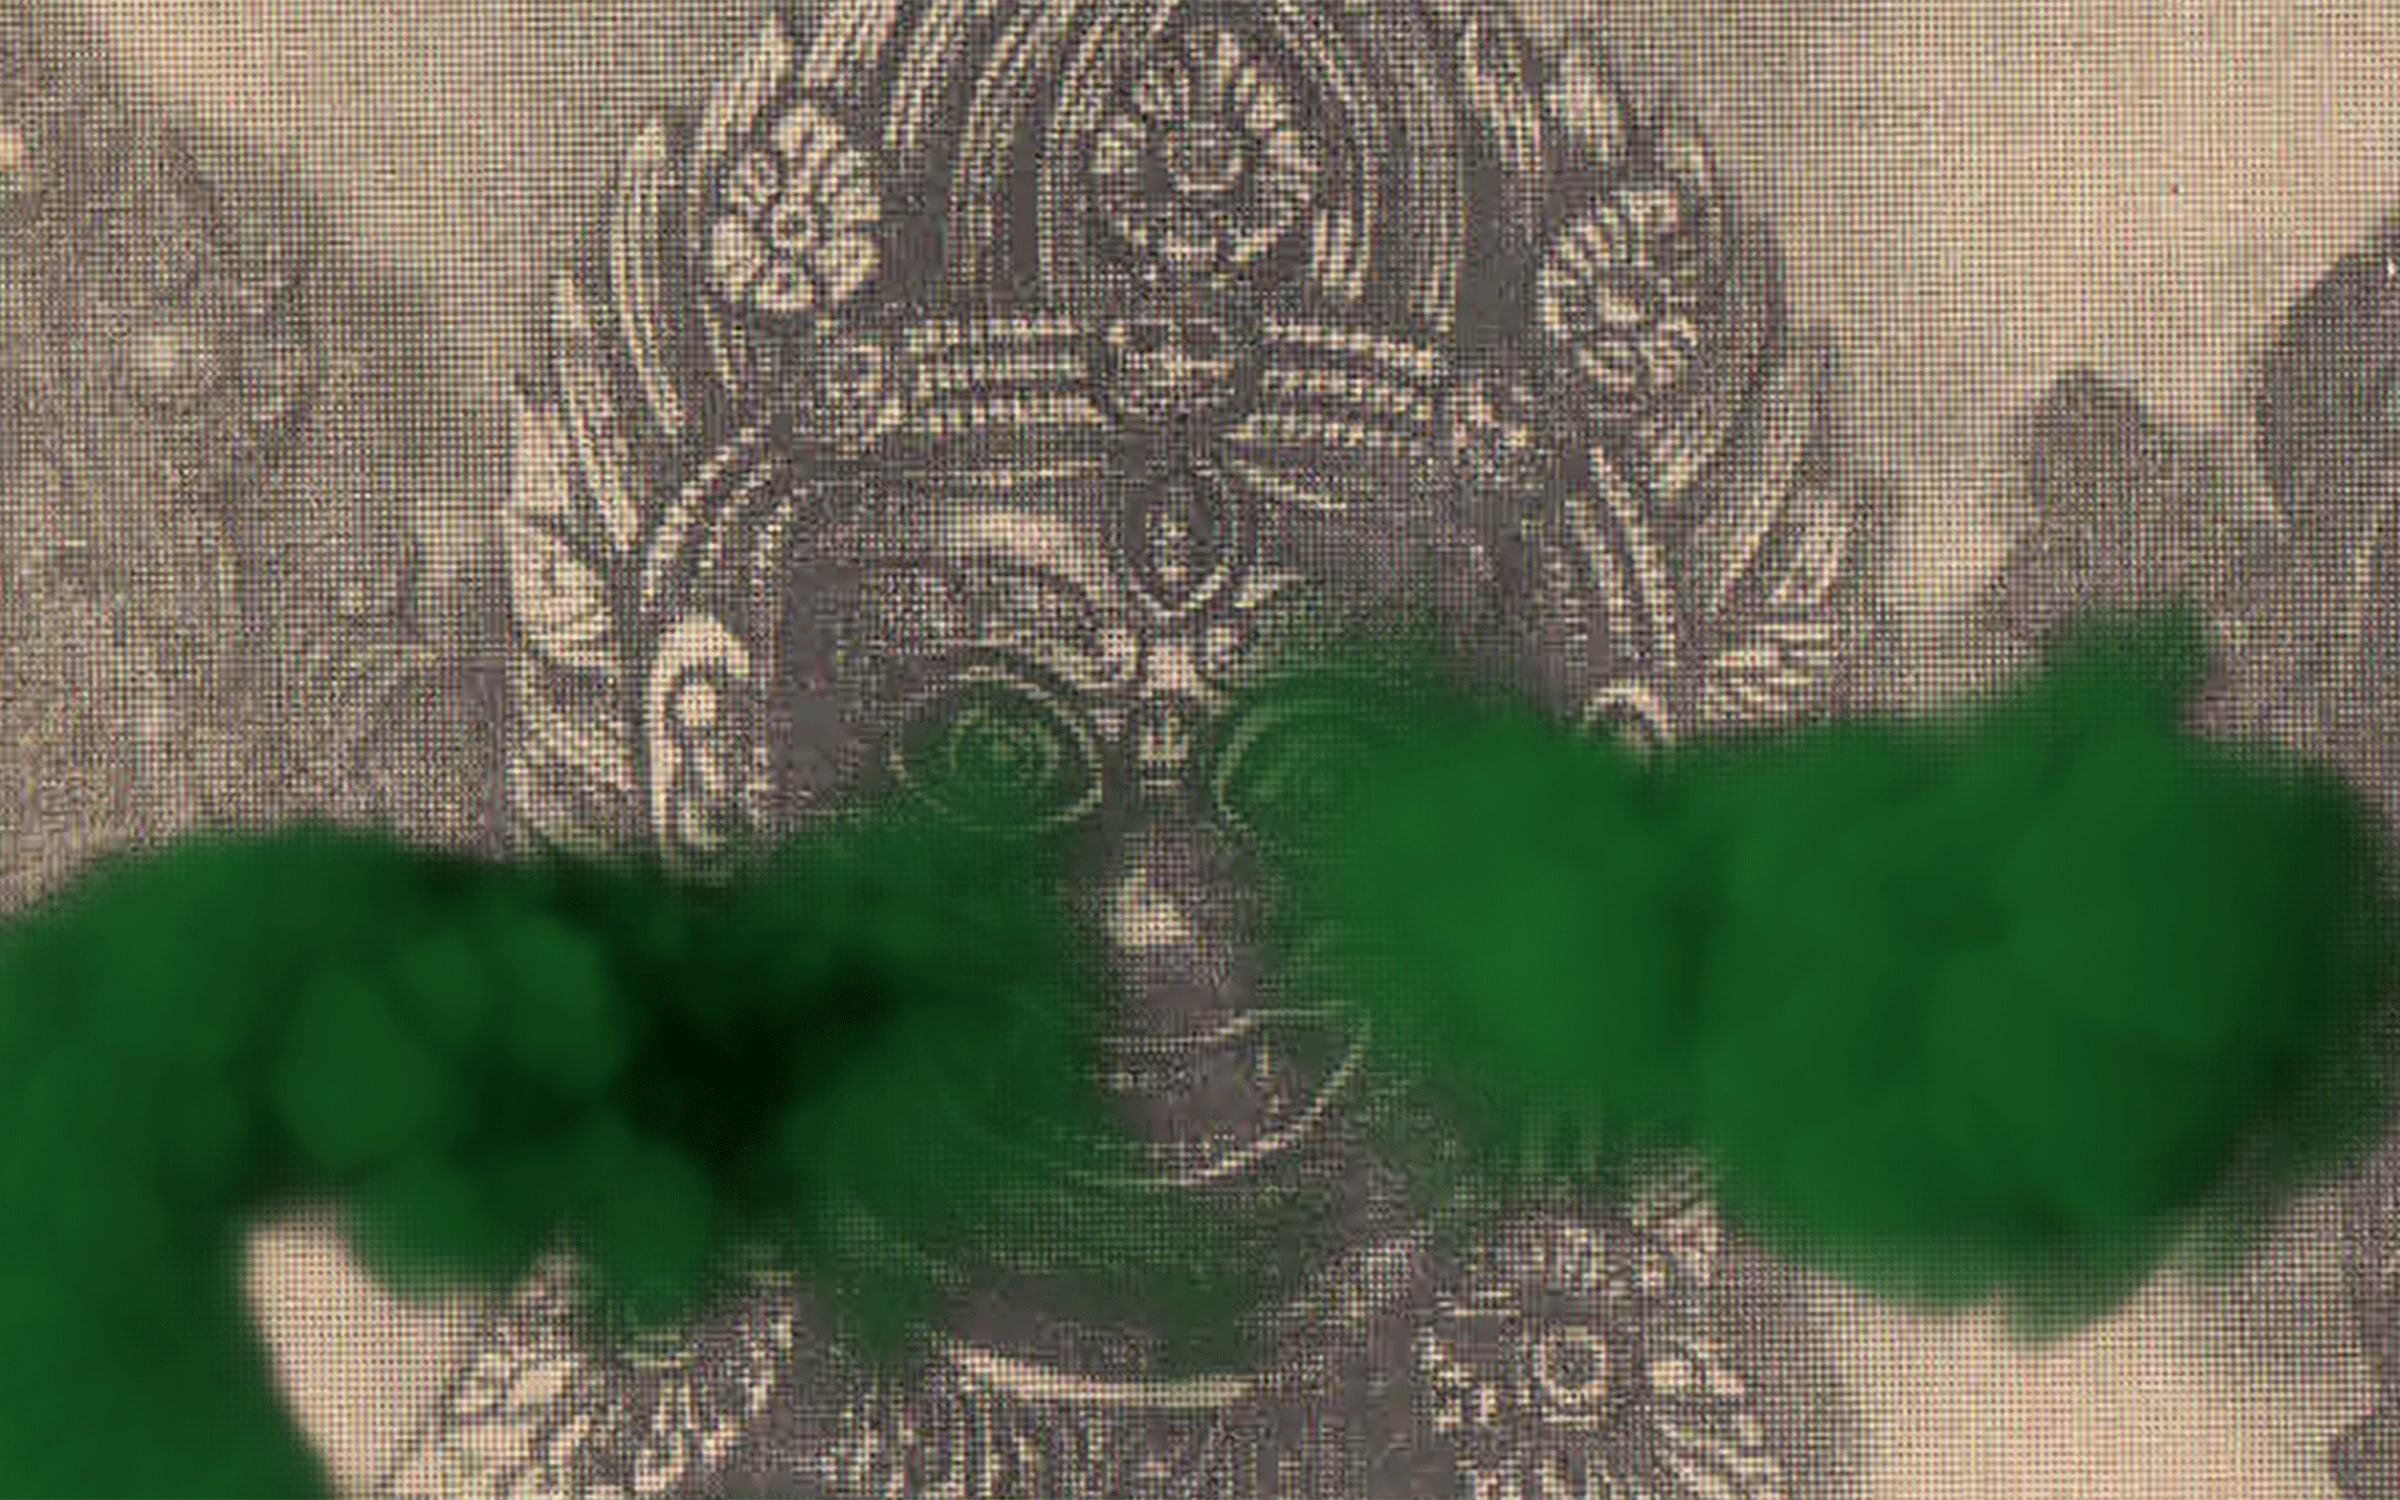 Hardeep Pandhal, The Spell of Silence (video still), 2023. Courtesy of the artist and Jhaveri Contemporary.